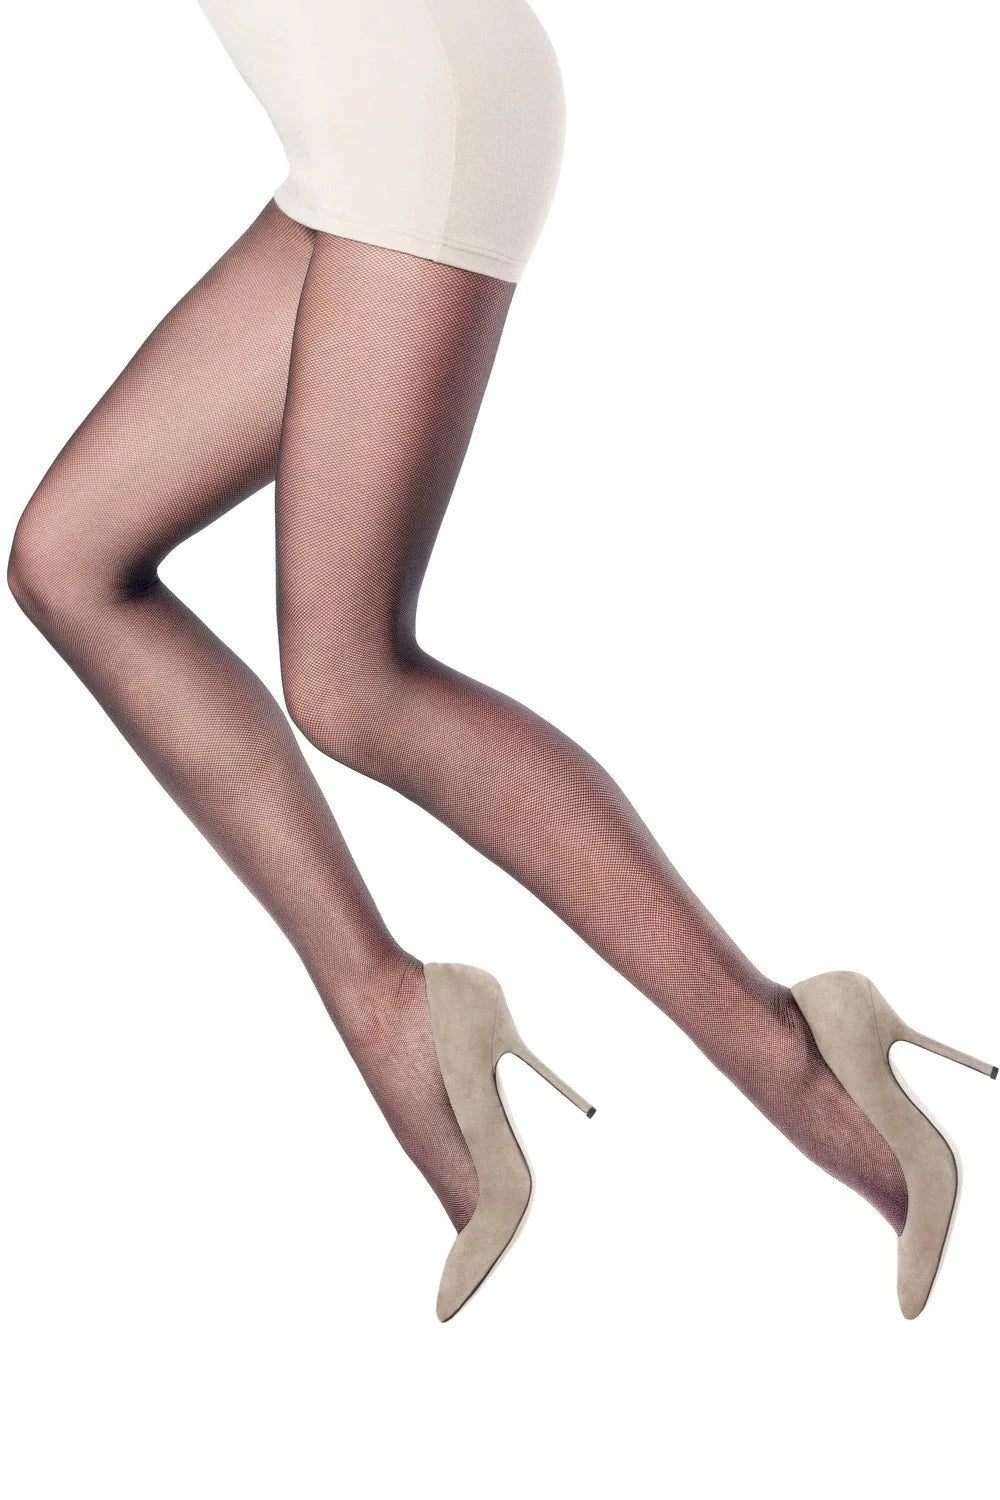 Oroblù Tulle Tights - Sheer micro mesh tulle effect tights with a cotton gusset and flat seams.